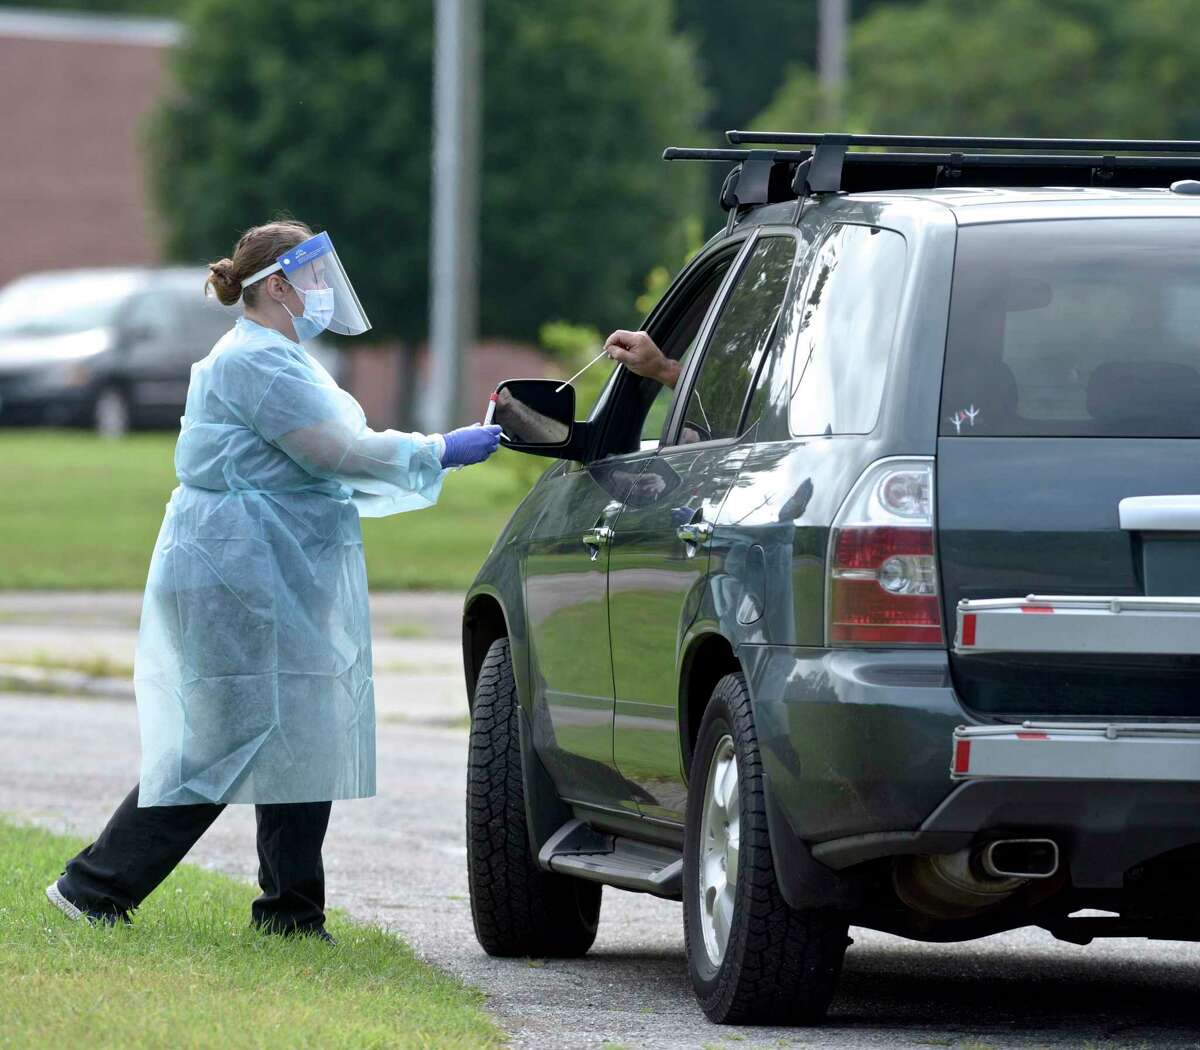 Heidi Bettcher, RN, Public Health Nurse, dispenses a self administered COVID test swab during the first day of the New Milford Health Department's COVID-19 drive-thru testing site at John Pettibone Community Center. Wednesday, August 11, 2021, New Milford, Conn.